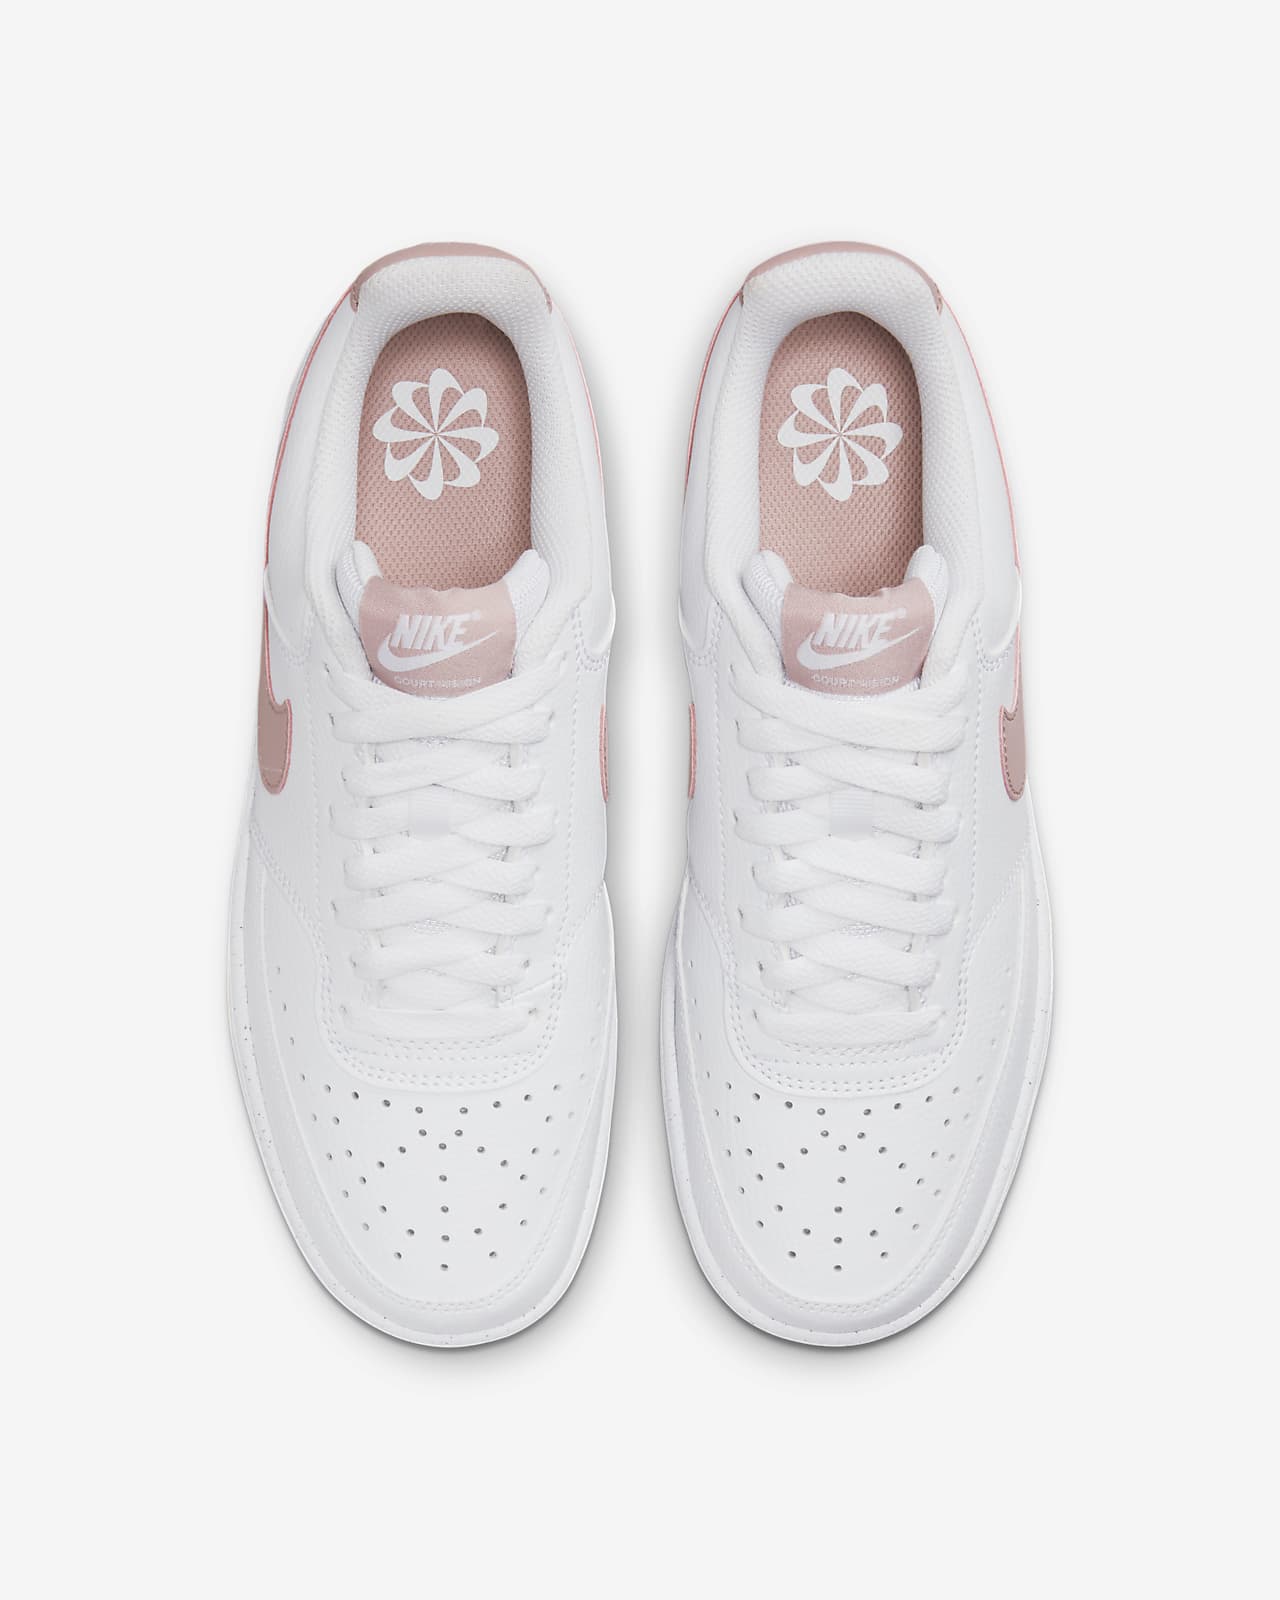 nike low cord shoes us flag images for women, Hotelomega Sneakers Sale  Online